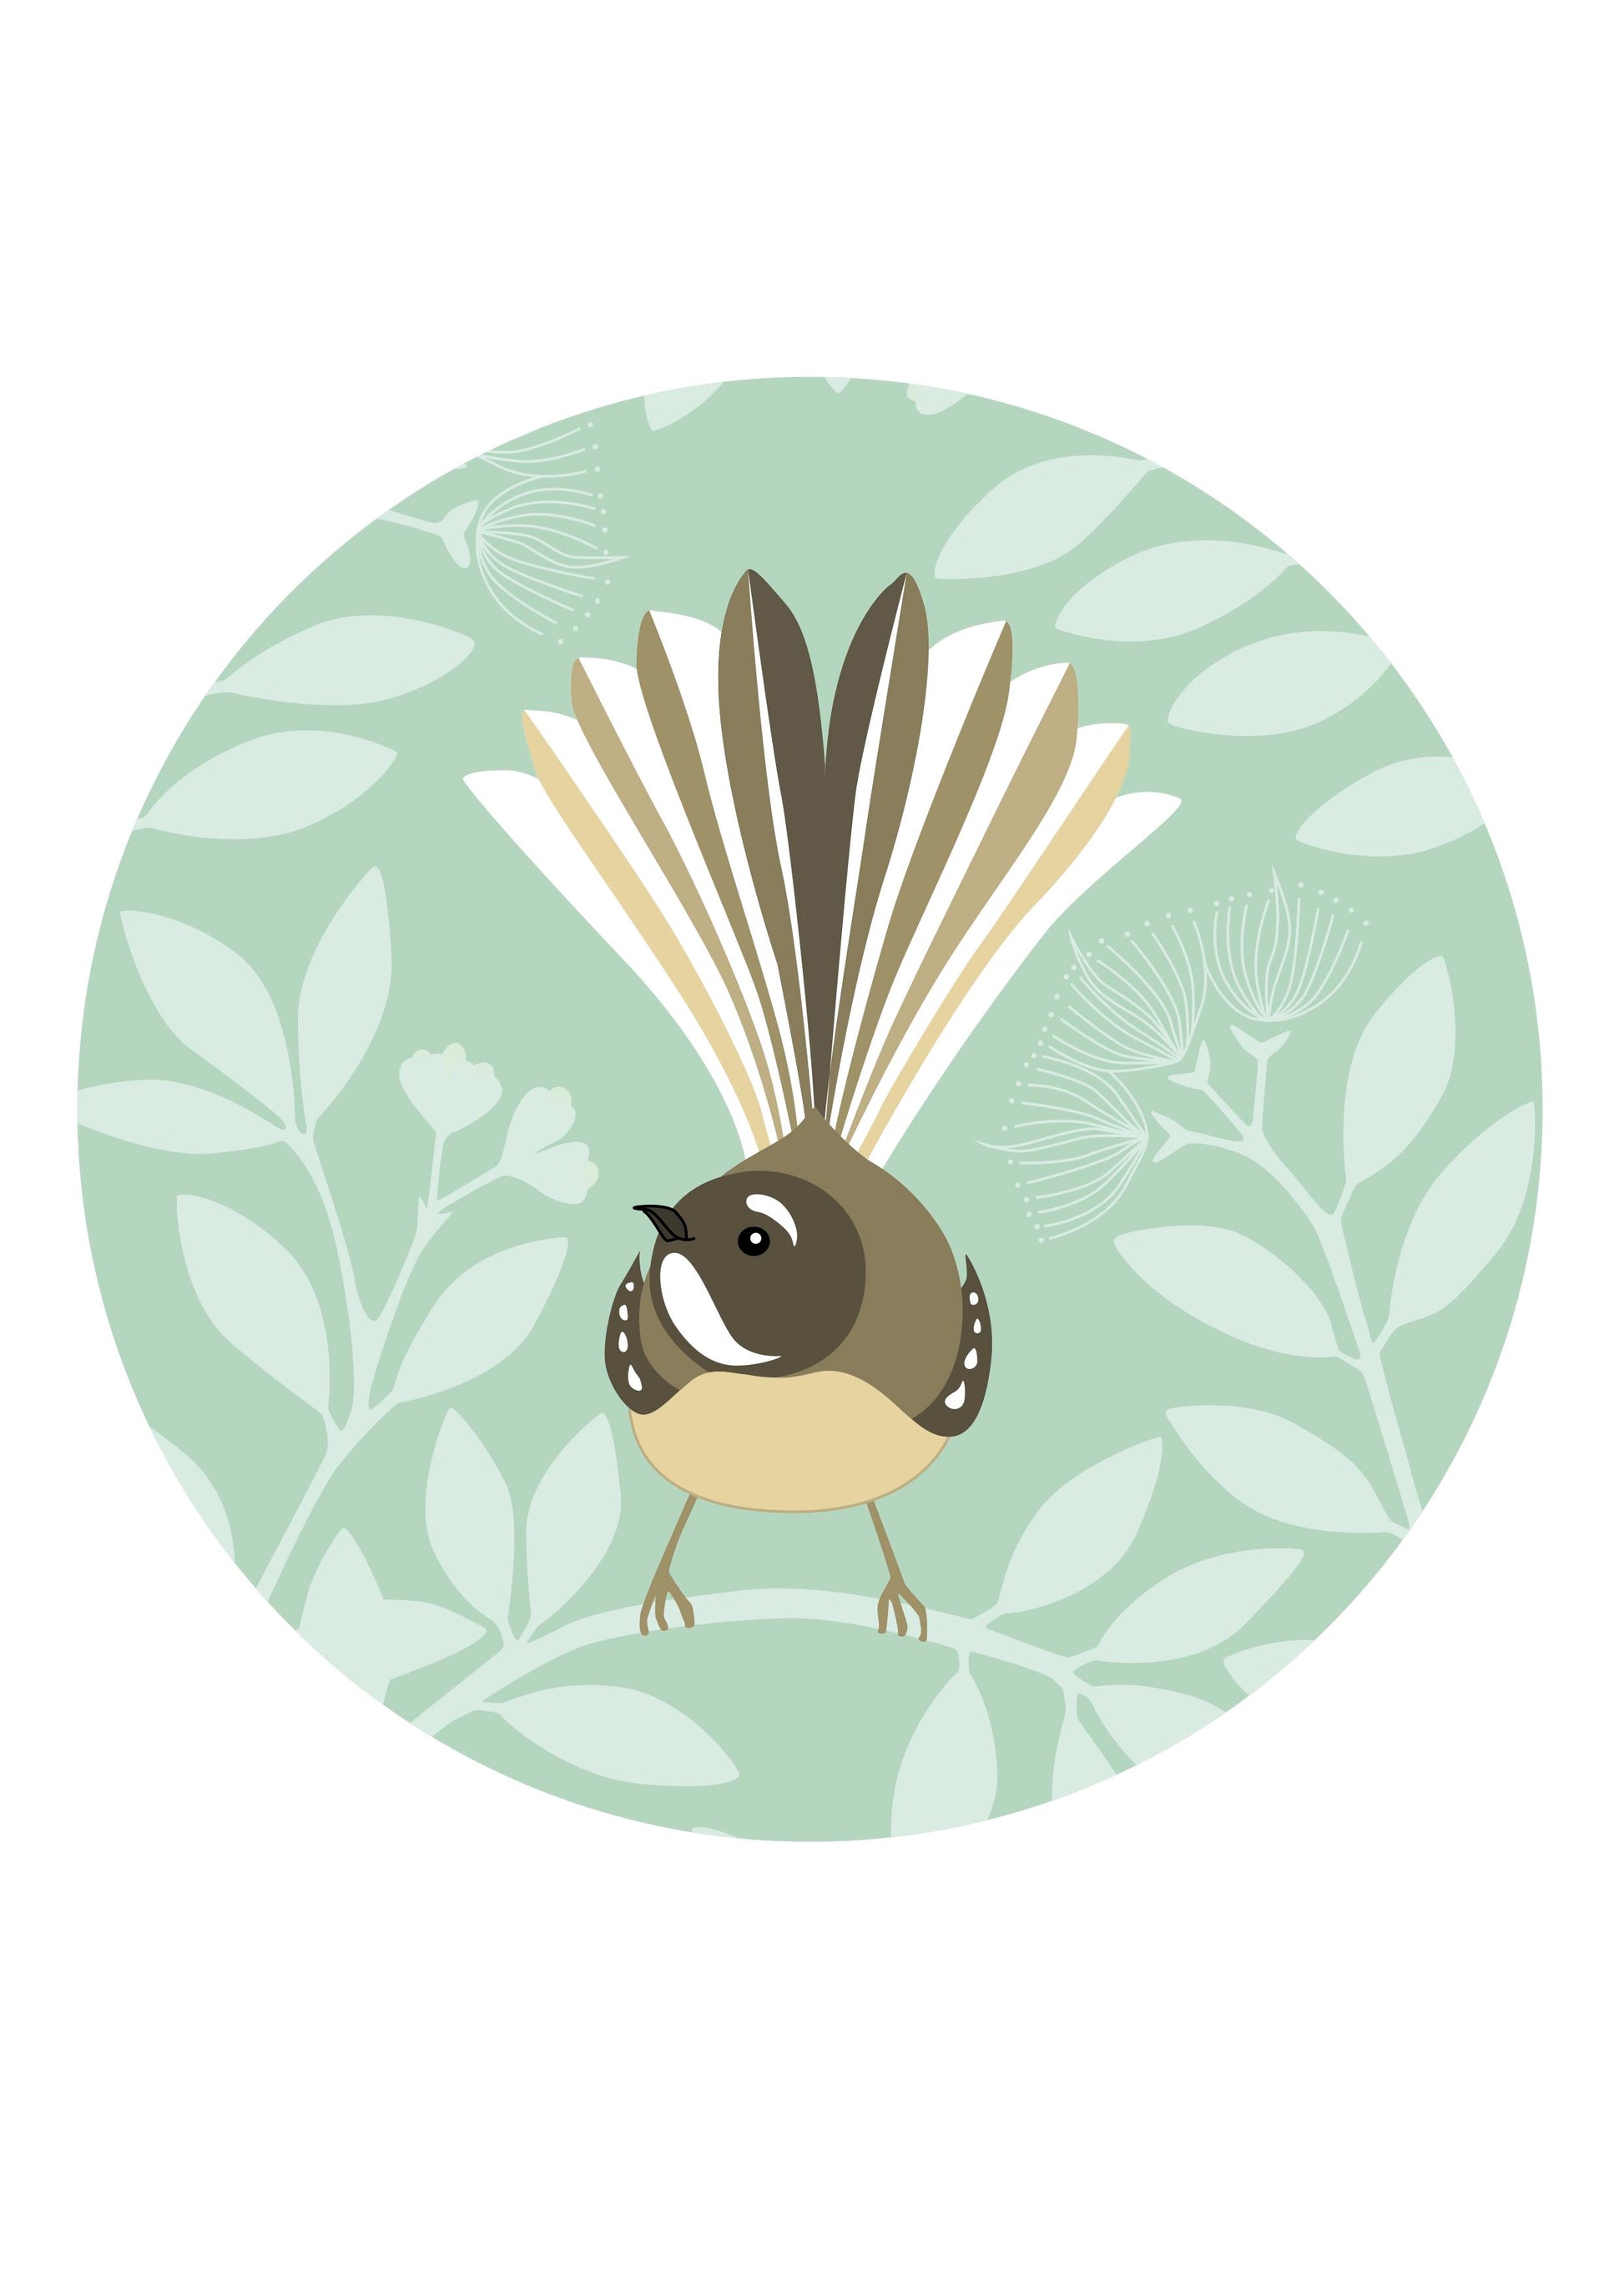 Art spot, wall decal of the Fantail bird of New Zealand by Hansby Design 